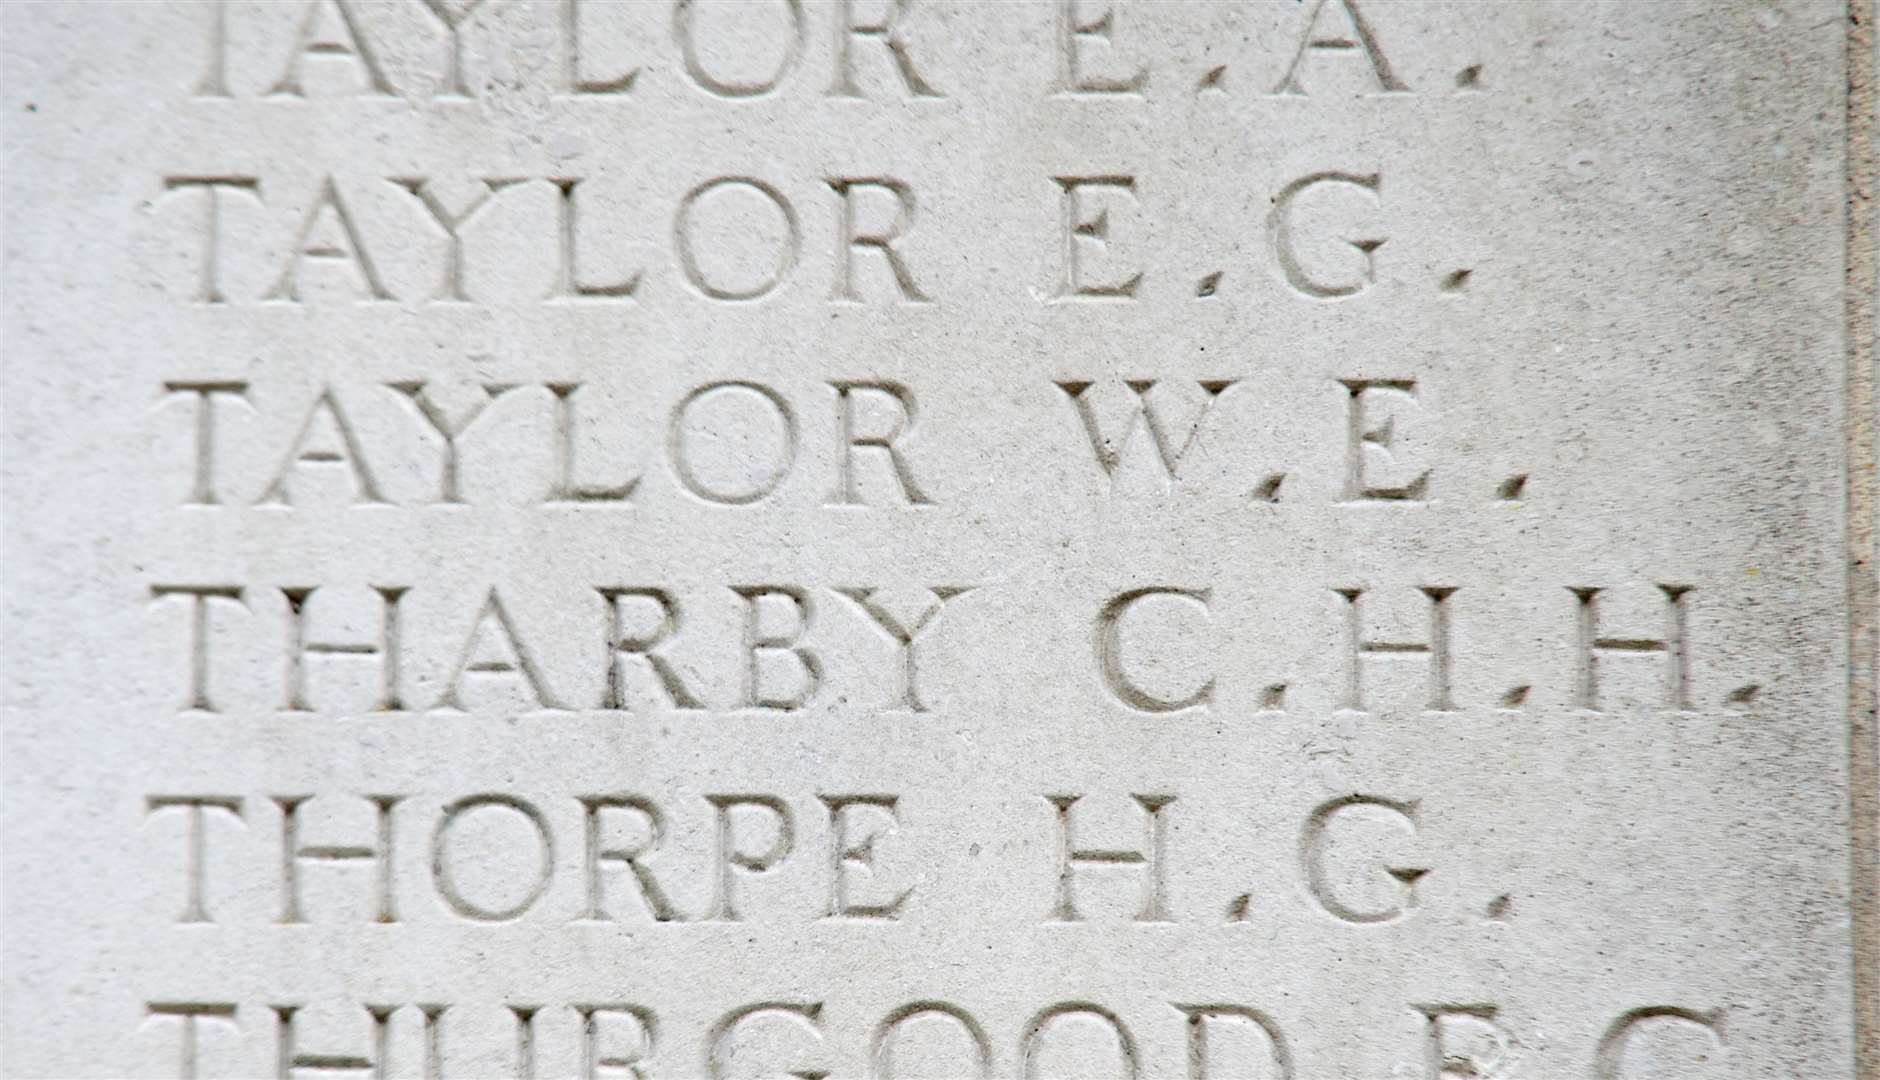 C H A Tharby's name incorrectly listed on the war memorial in Castle Gardens